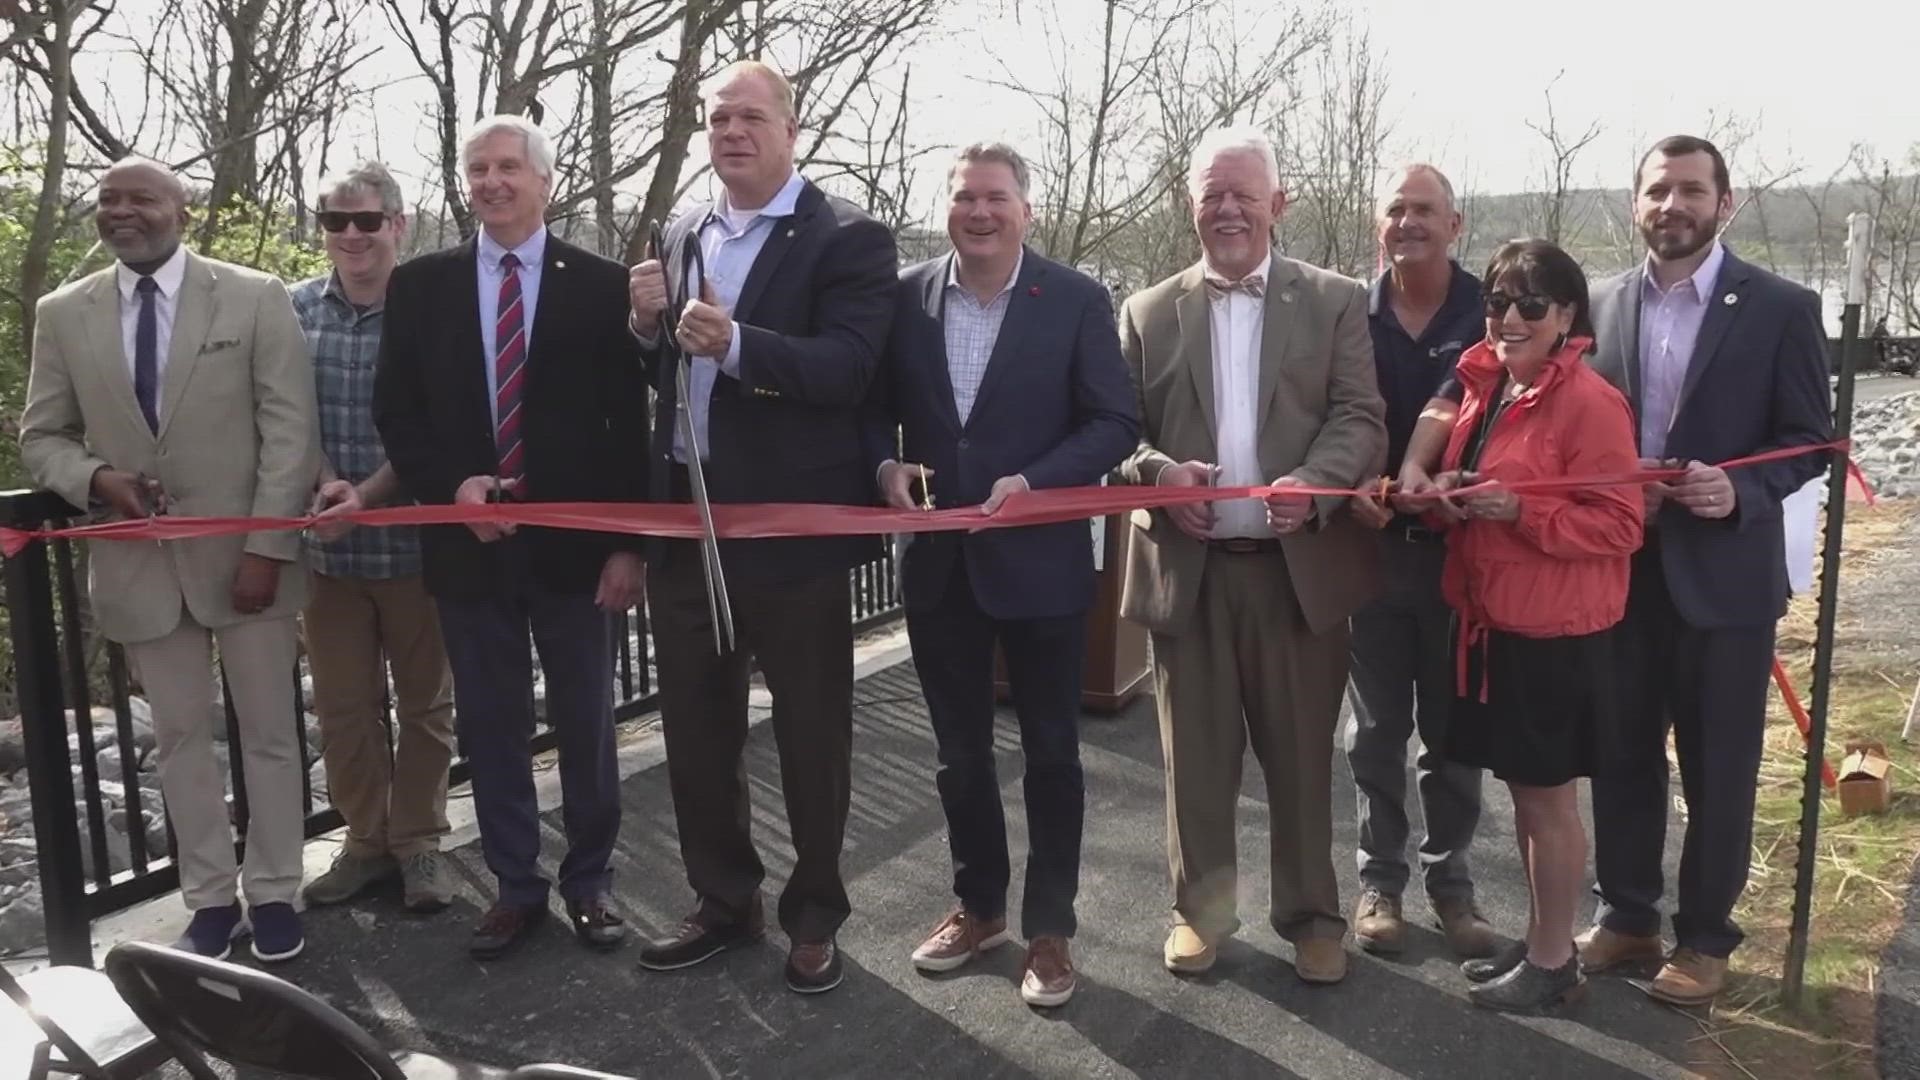 The boardwalk is part of a $2 million project that calls for more greenways and trails in the Farragut area, near Cove Park.